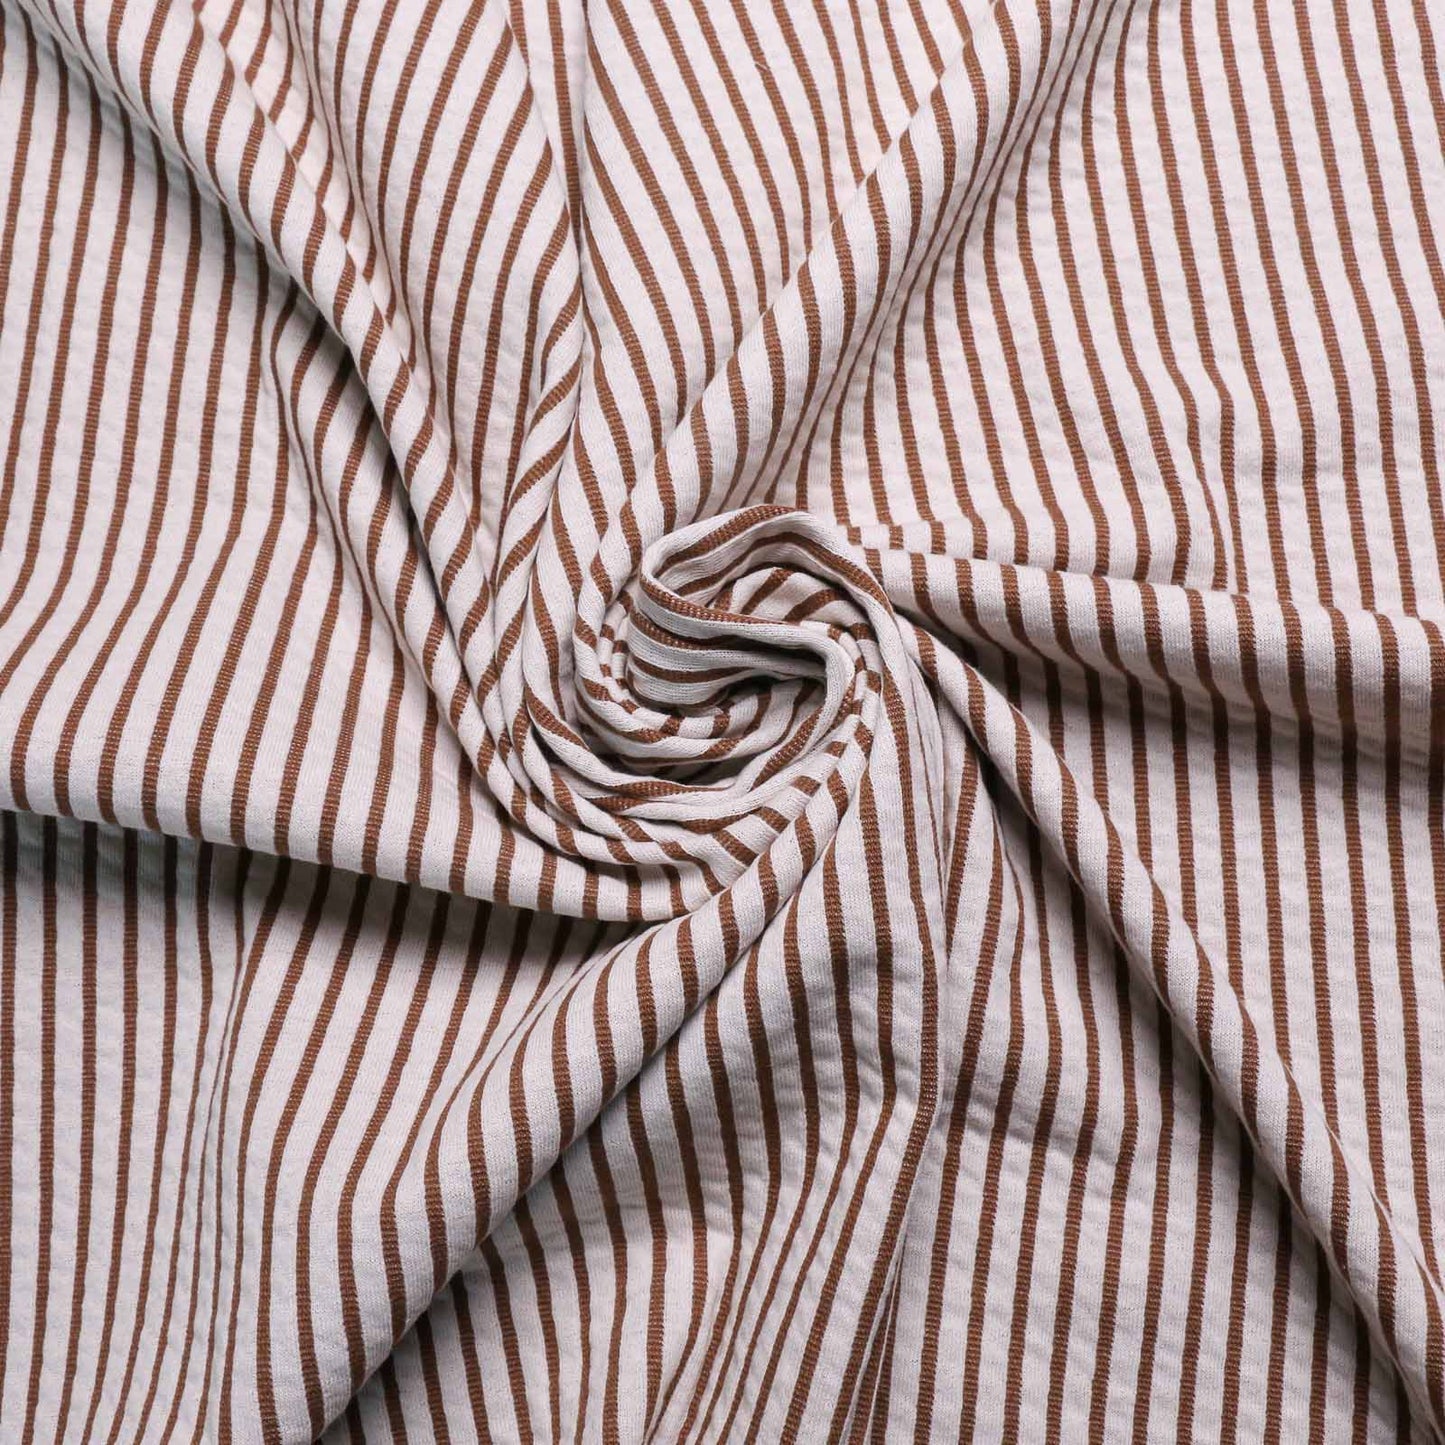 striped beige and white double jersey knit viscose dress fabric